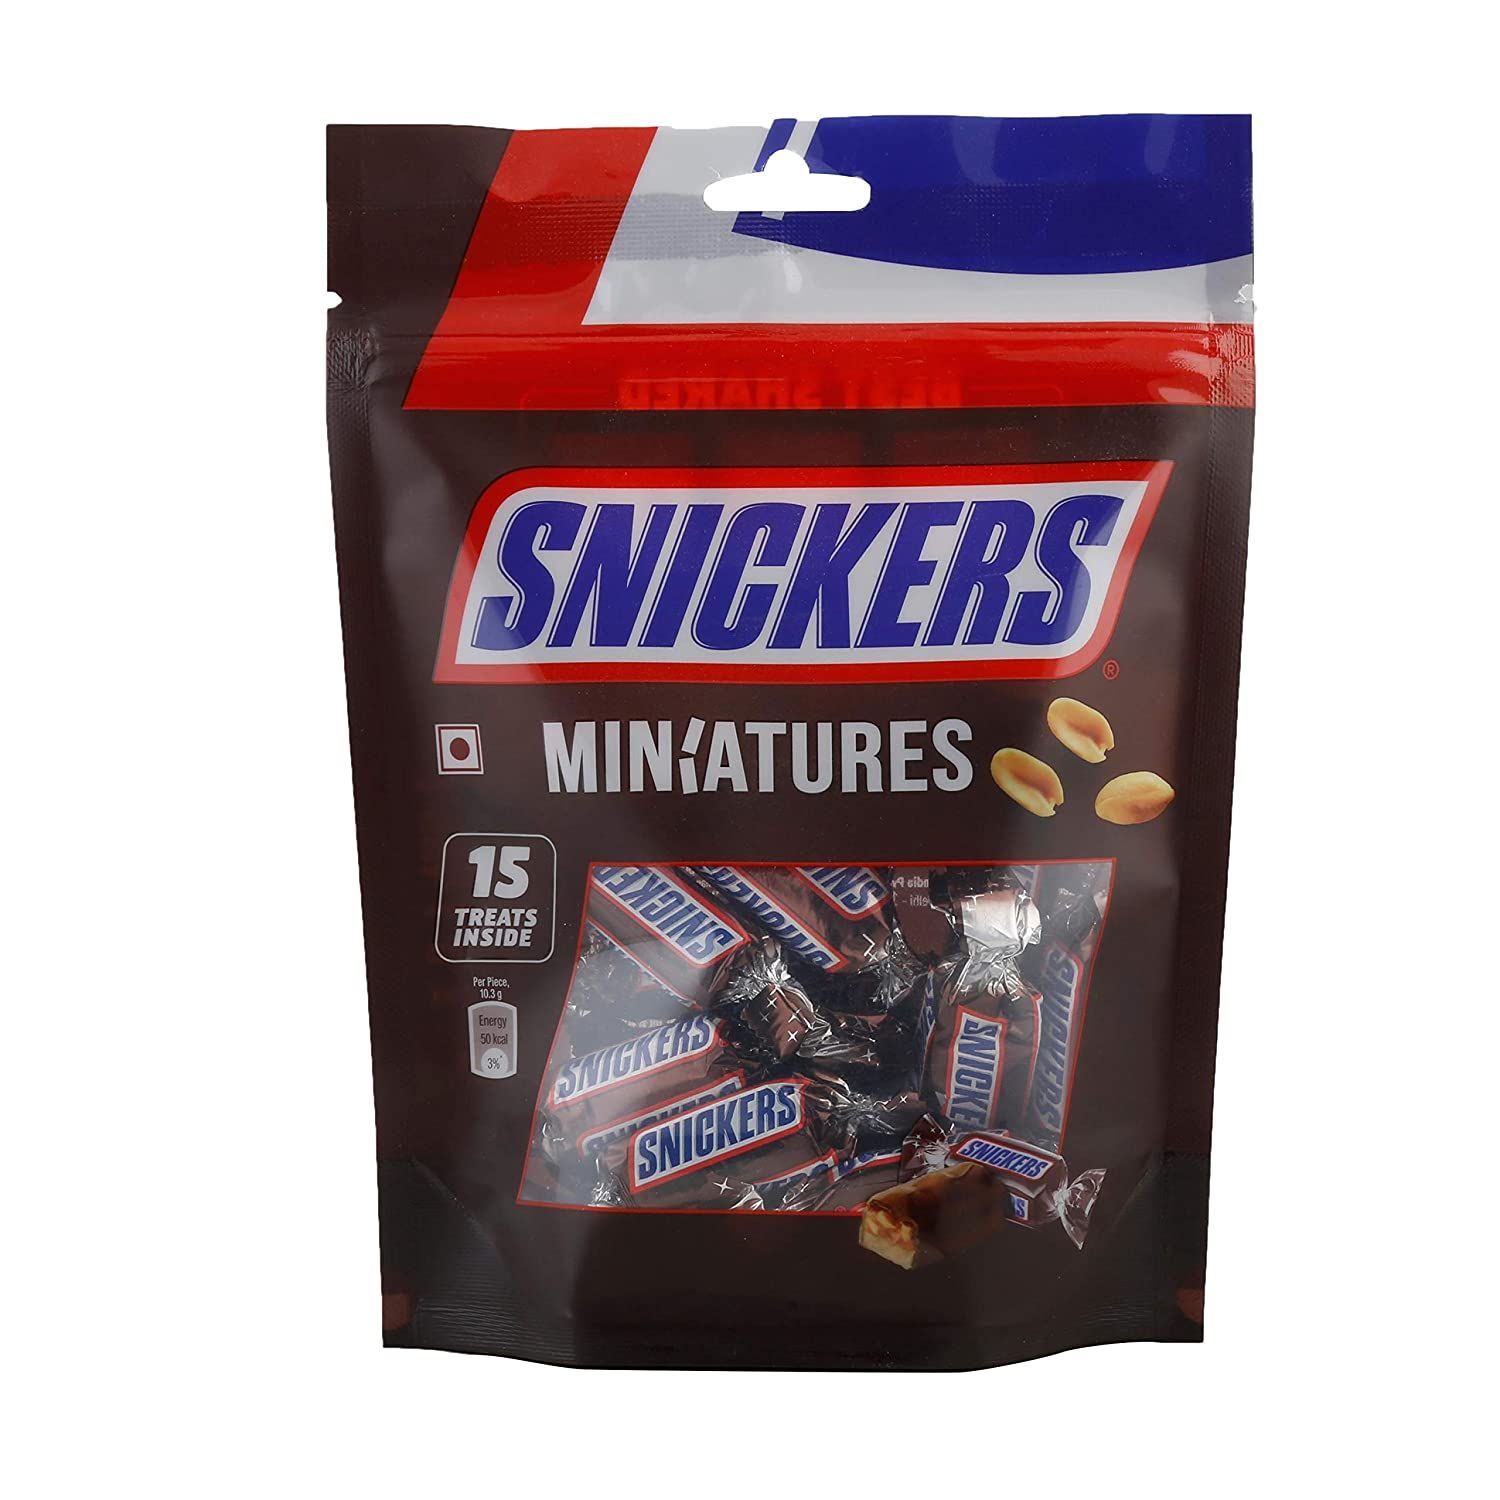 Snickers Caramel Filled Chocolate Miniature Image